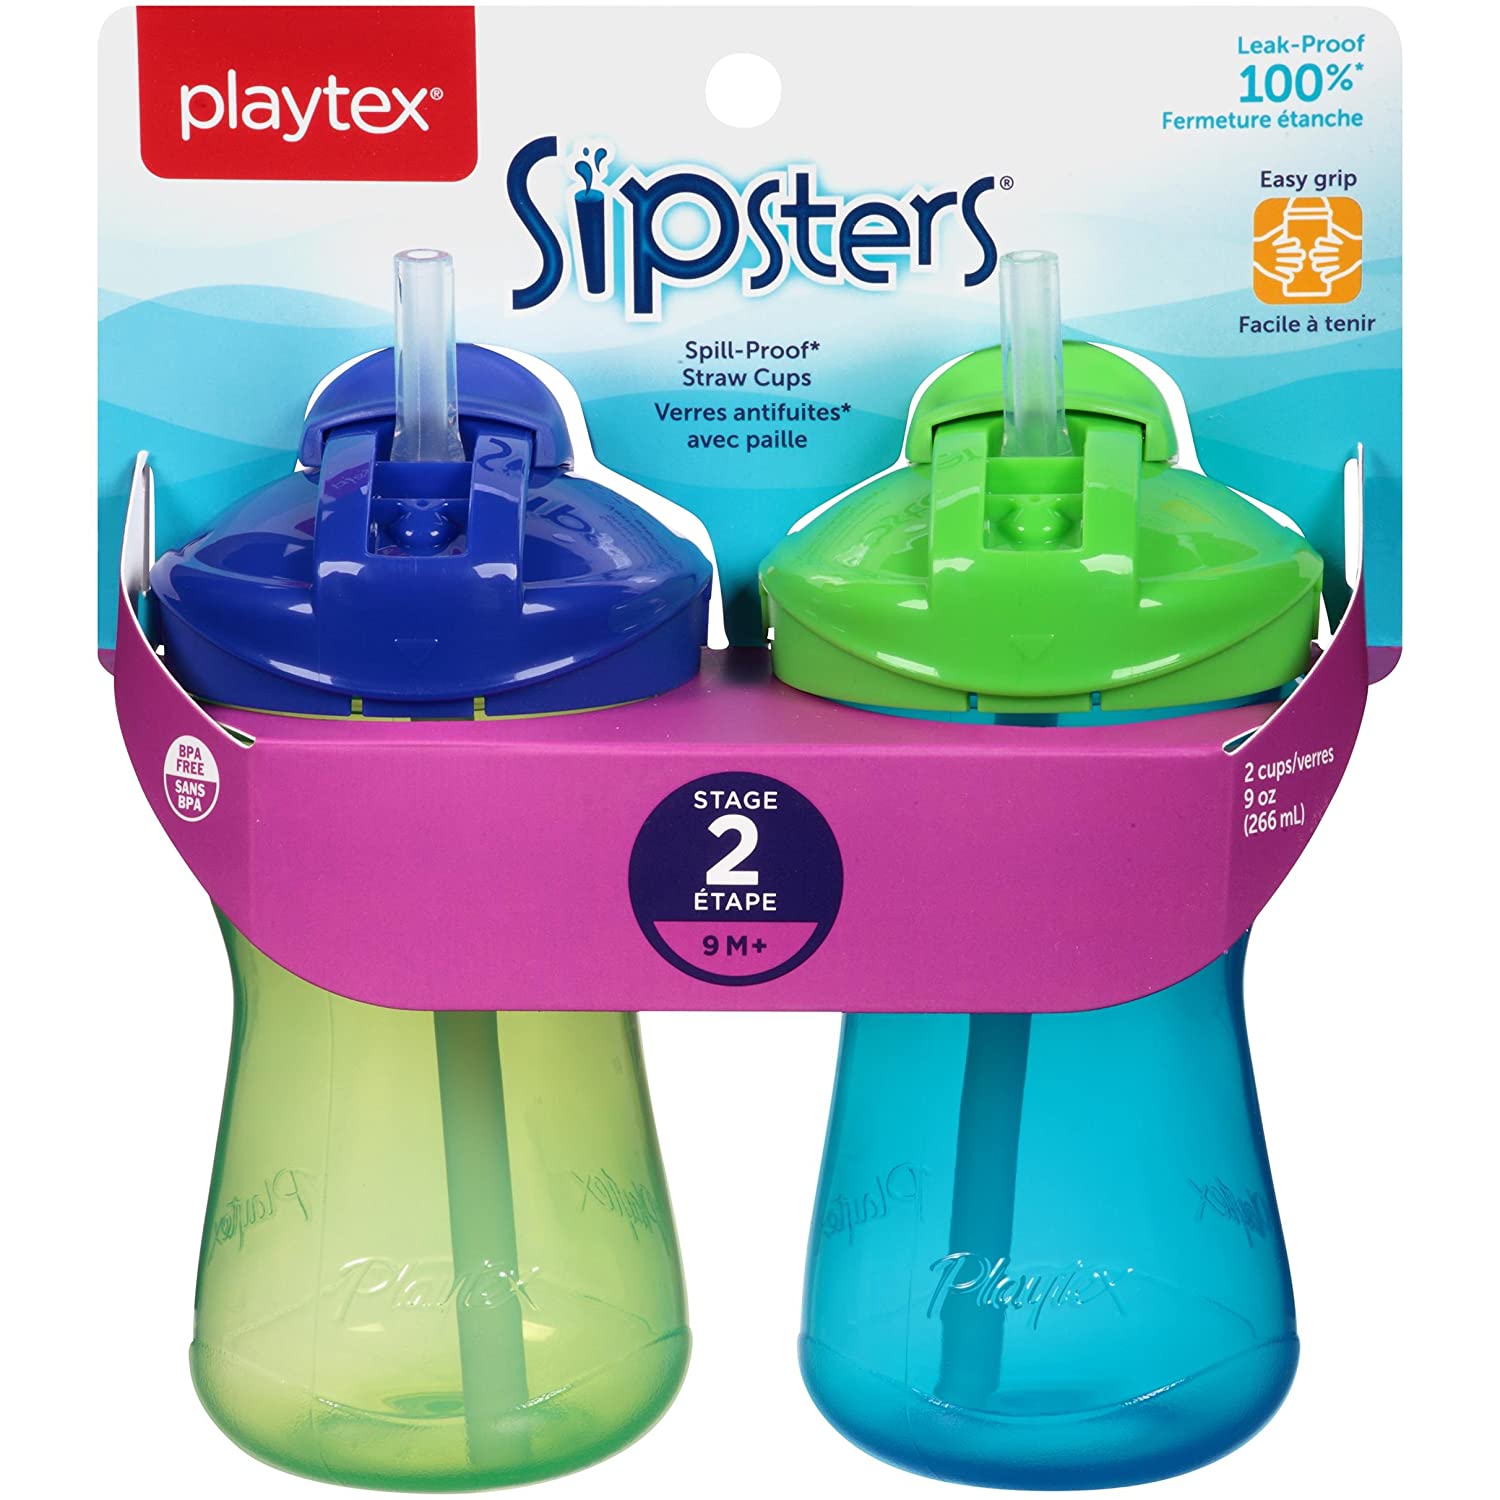 Playtex® Stage 2 Straw Cup  - 2 Pack - Green and Blue